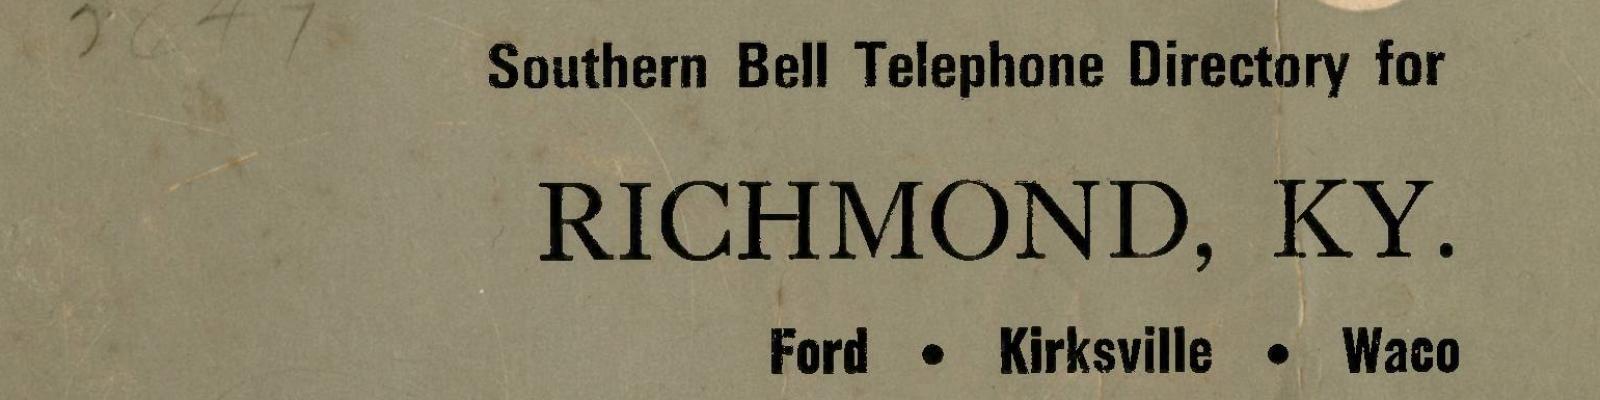 telephone directory for richmond ky